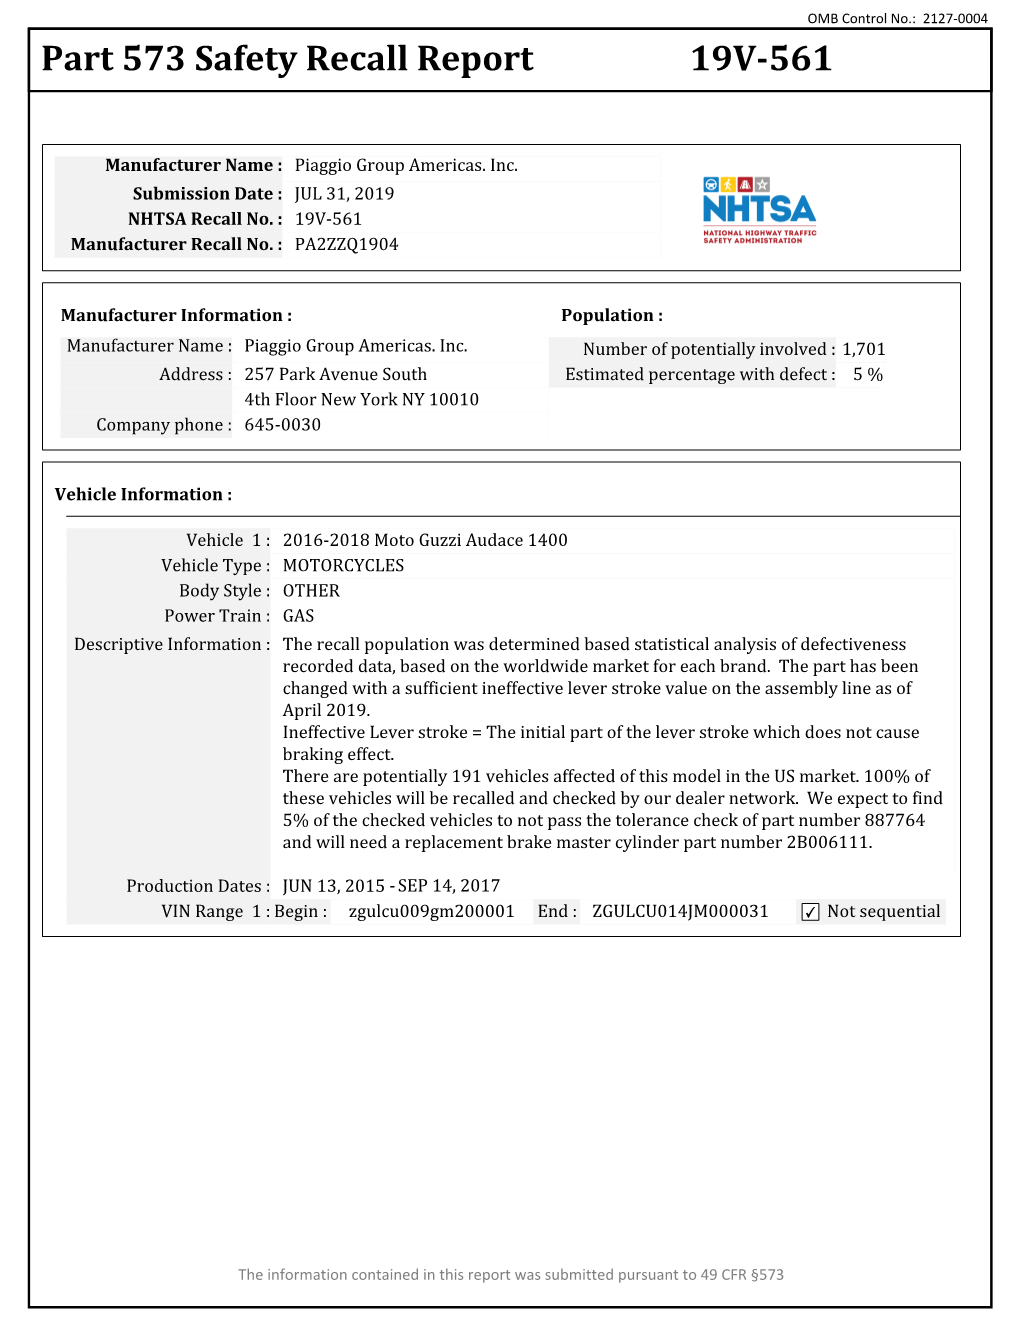 Part 573 Safety Recall Report 19V-561